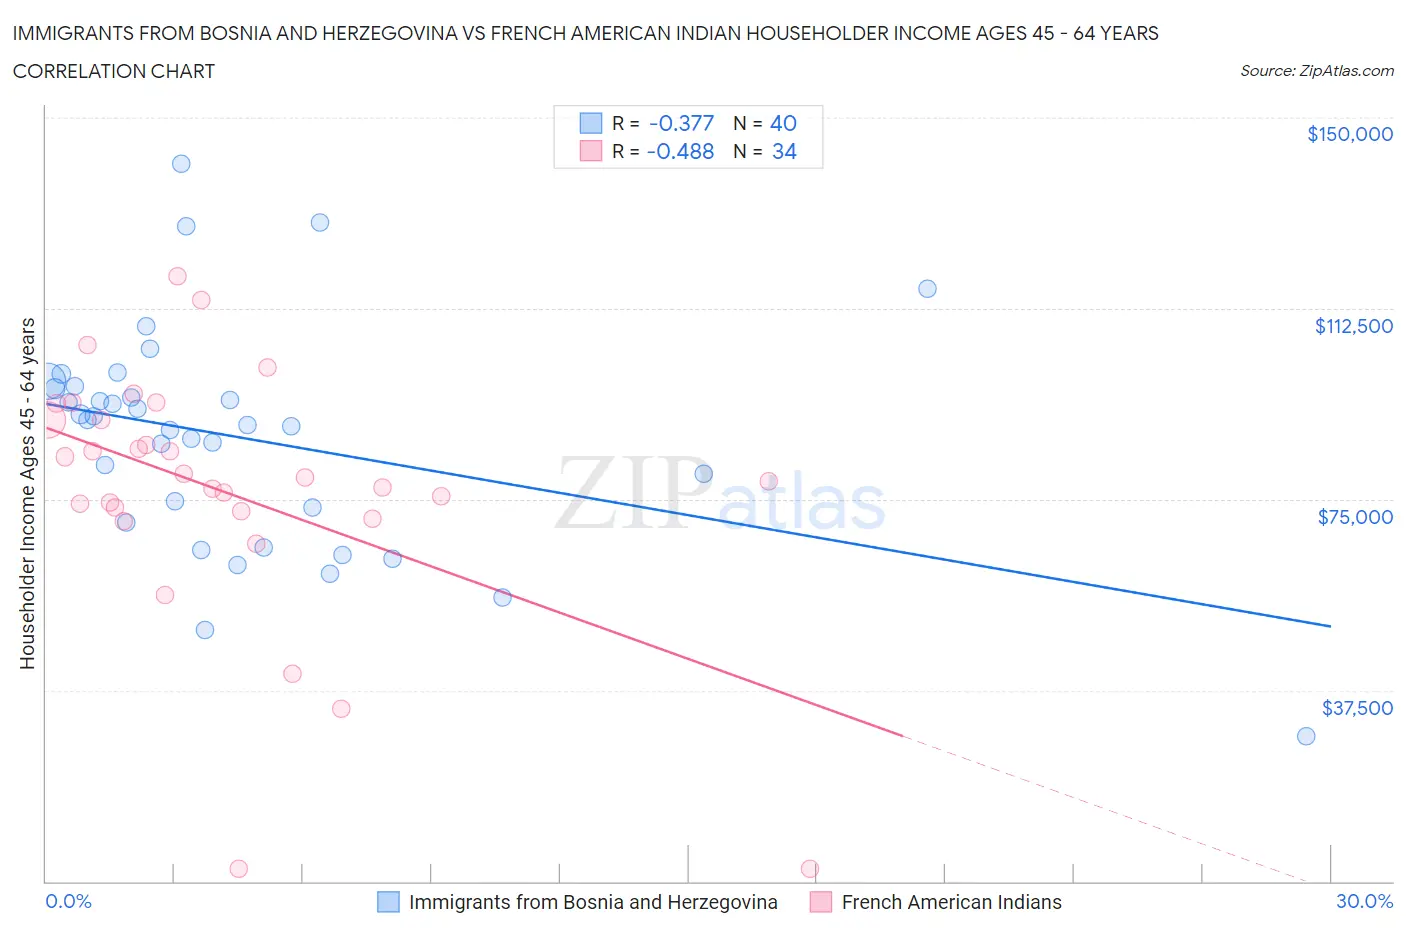 Immigrants from Bosnia and Herzegovina vs French American Indian Householder Income Ages 45 - 64 years